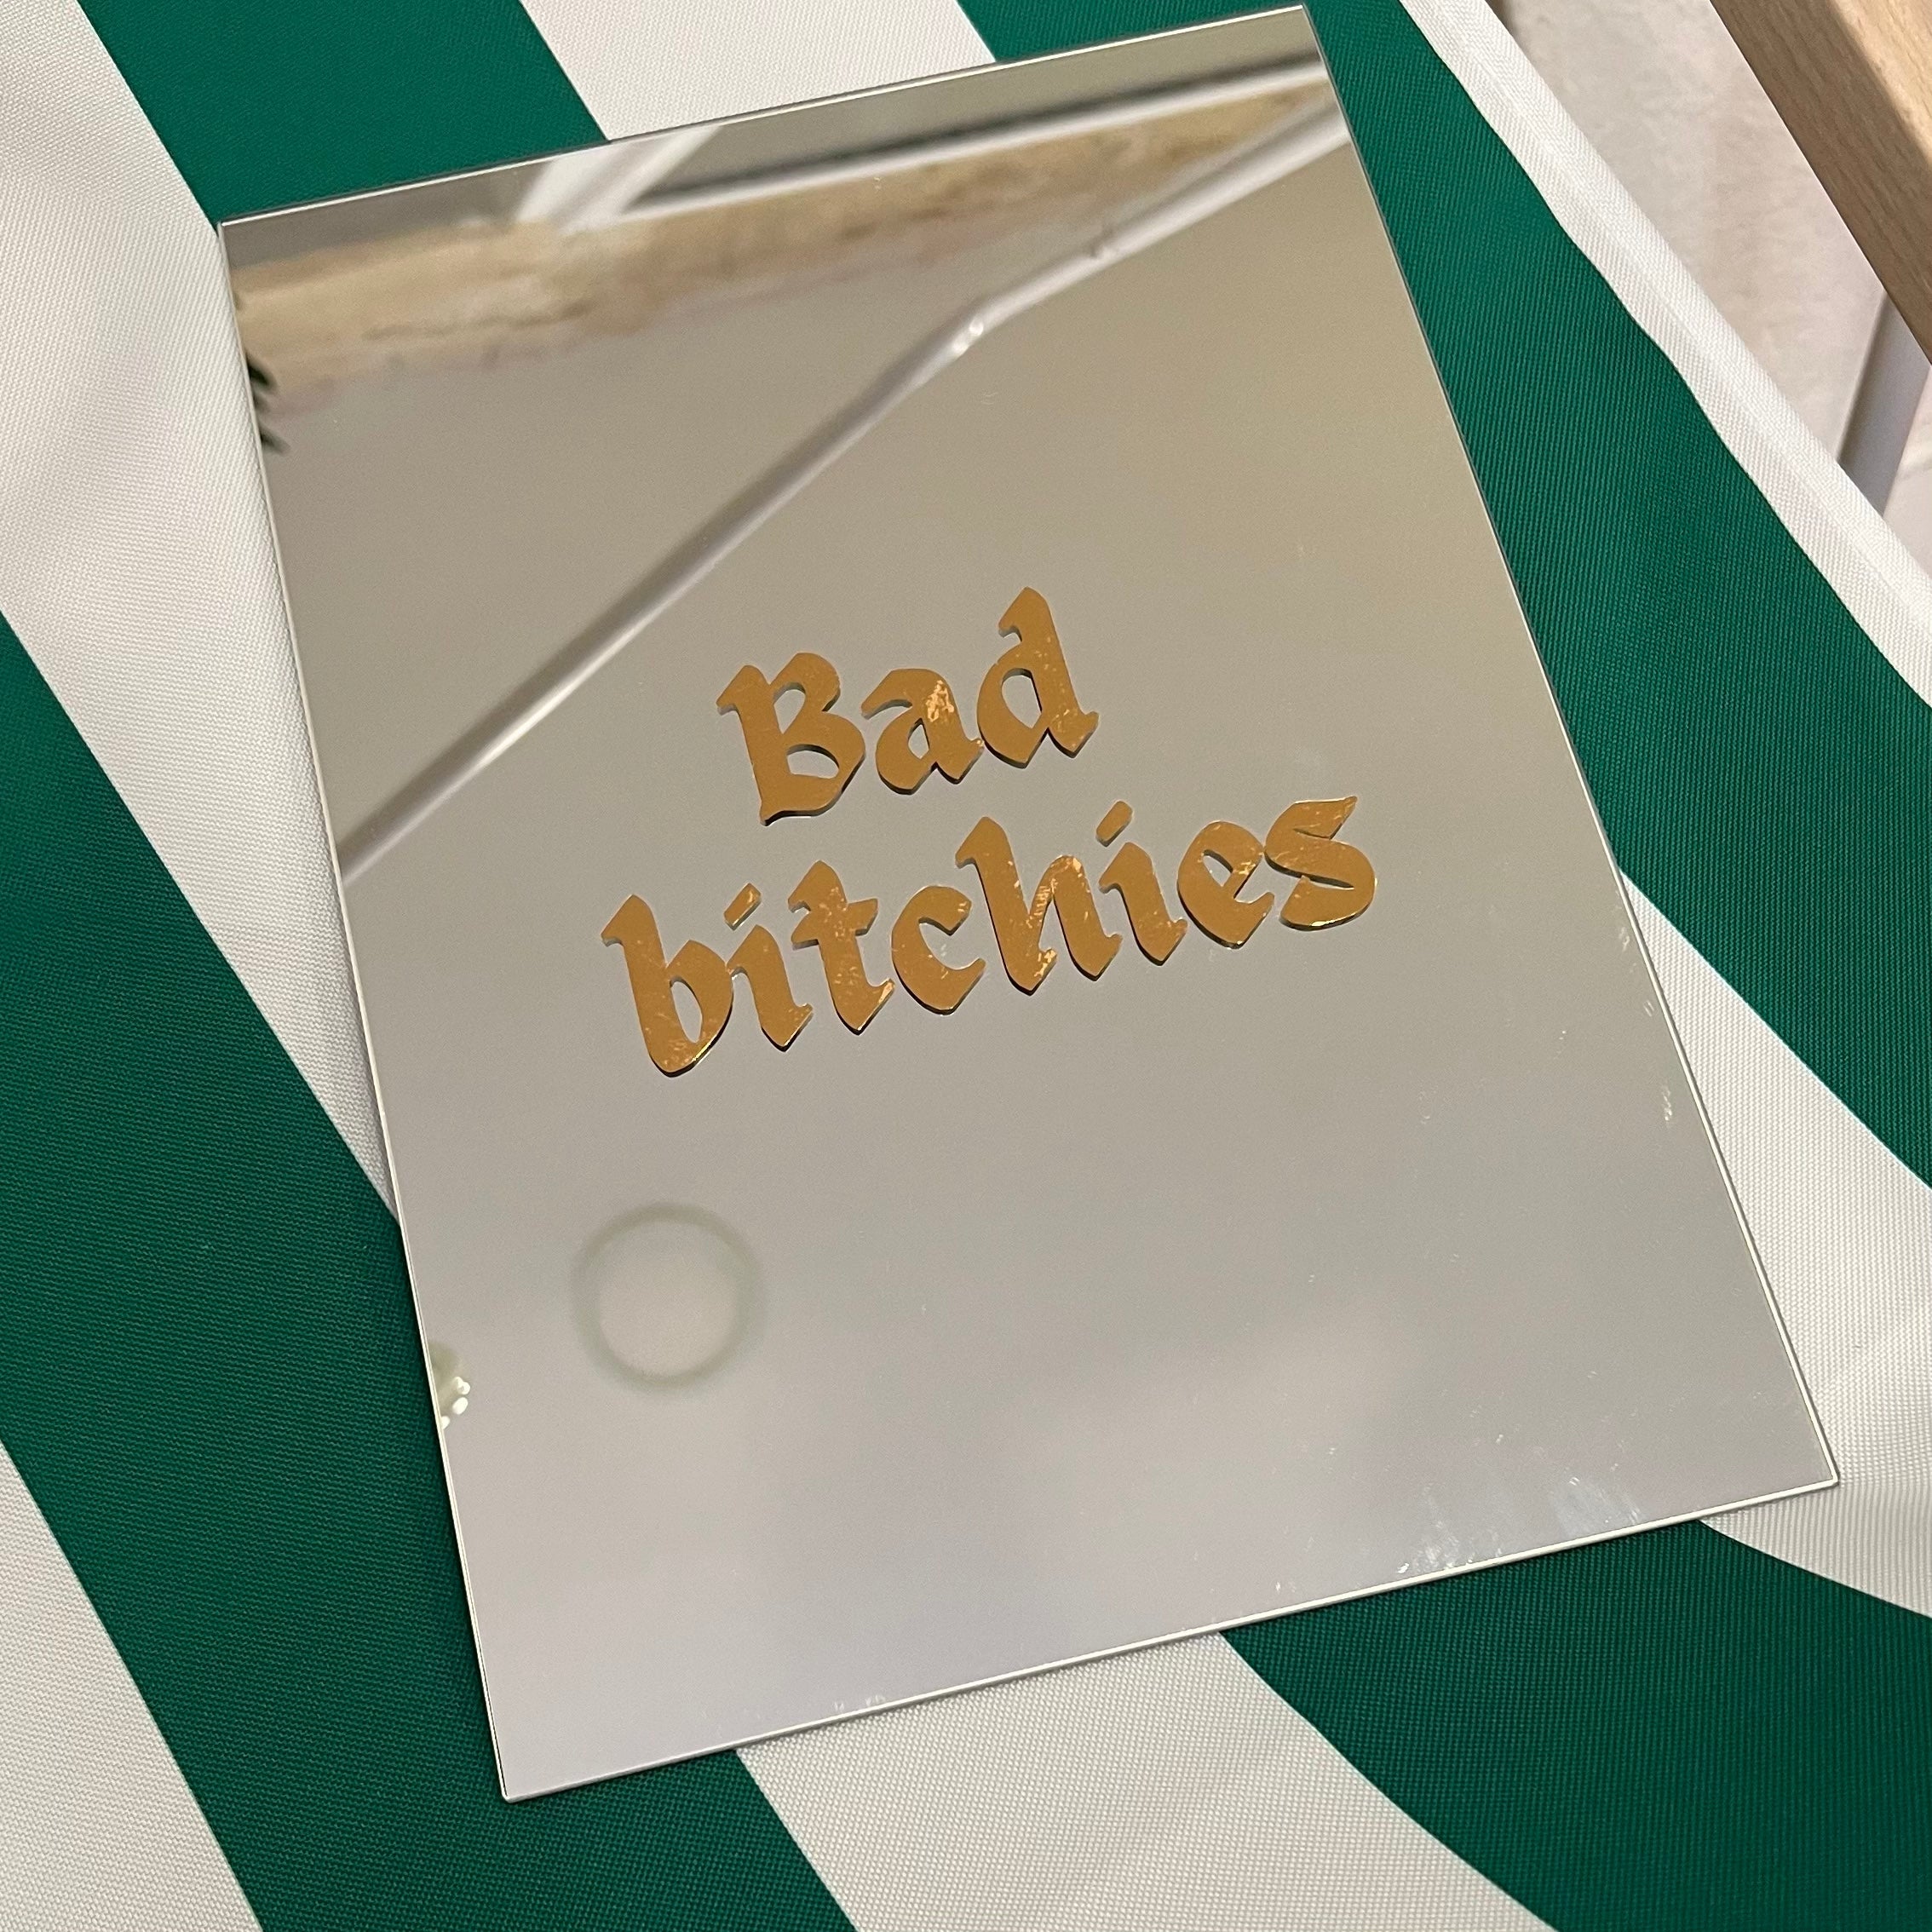 A4 mirror with the inscription "Bad Bitchies" in yellow